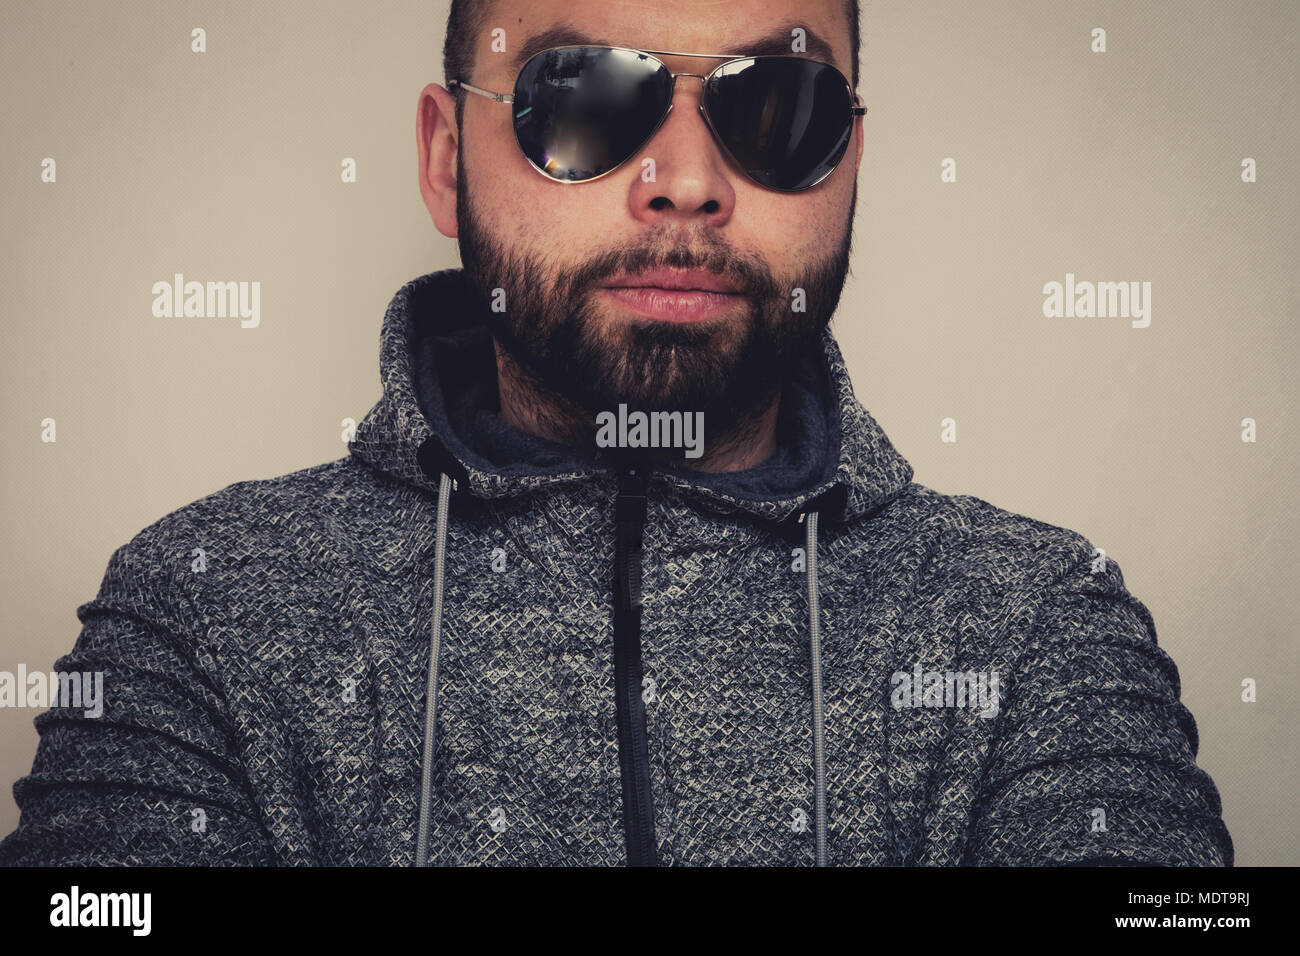 Handsome young man in sunglasses Stock Photo - Alamy